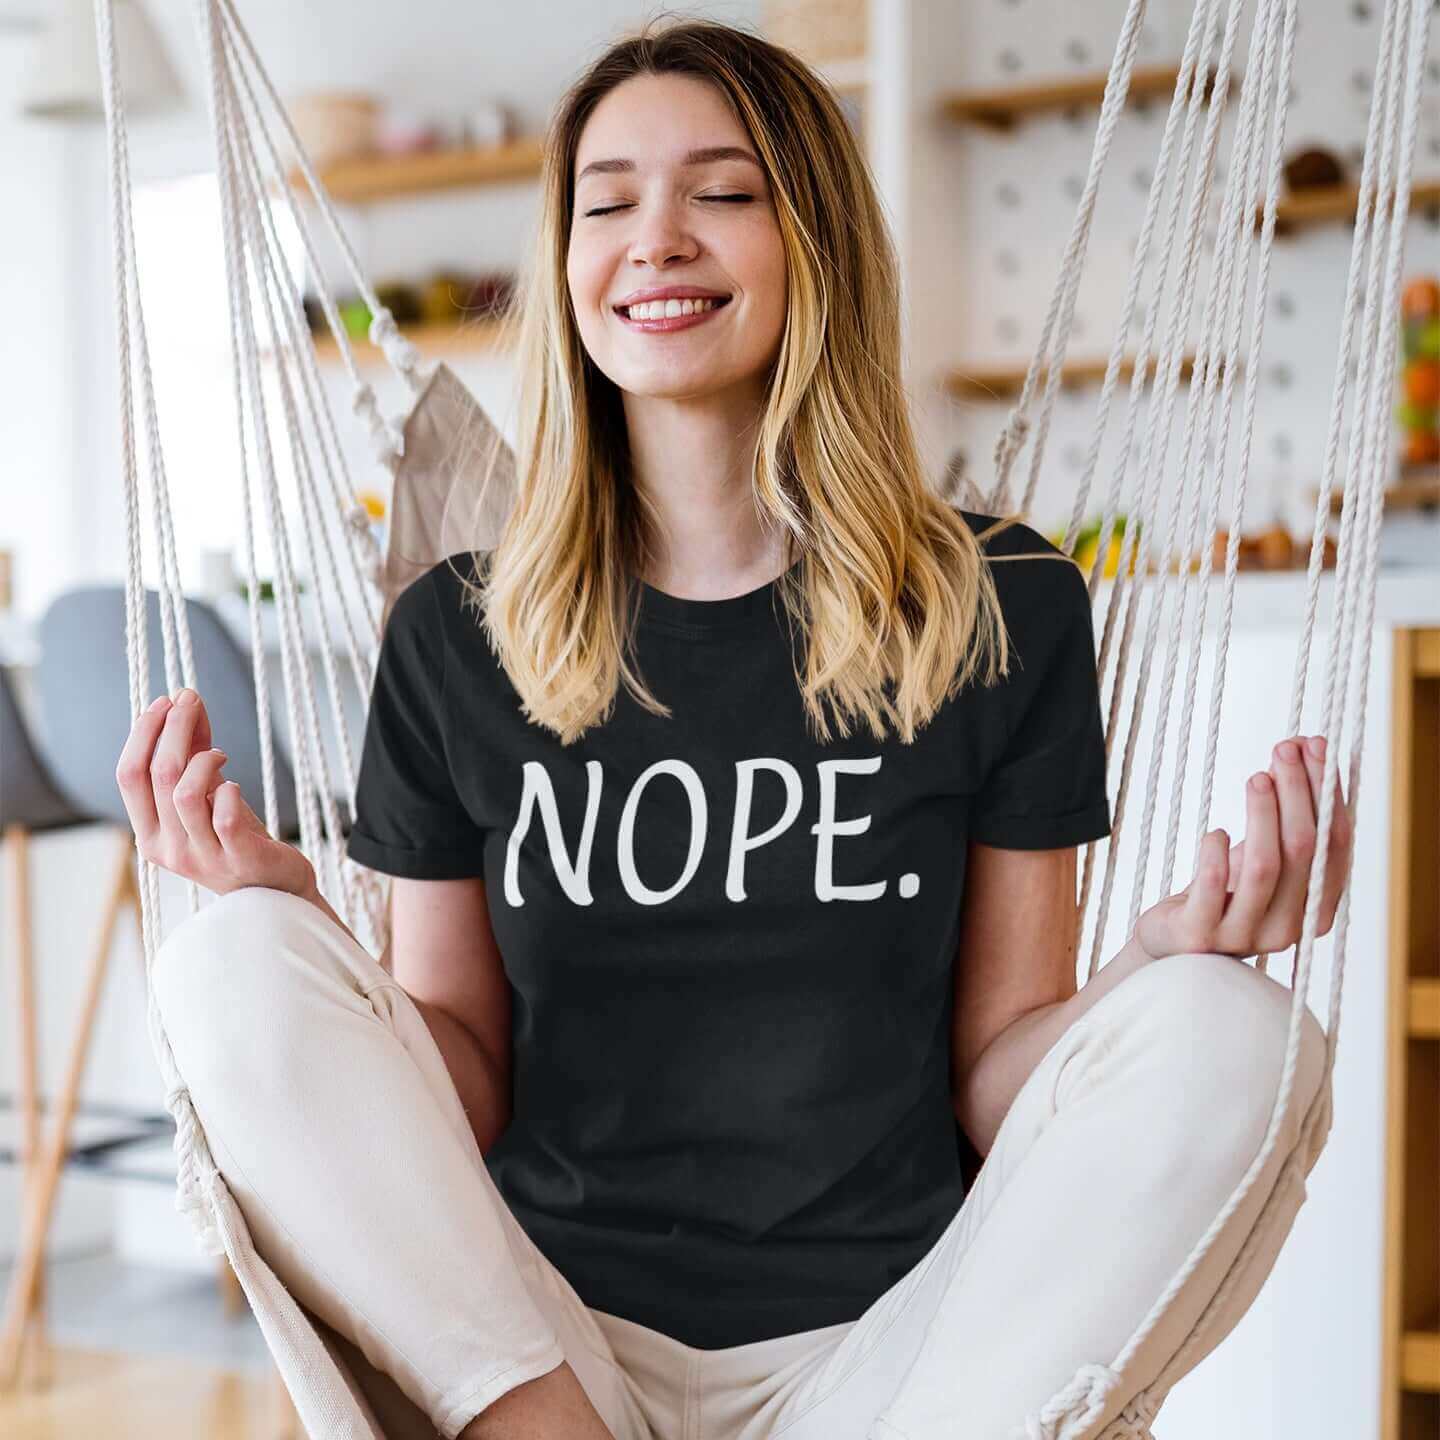 Woman wearing a black t-shirt with the word Nope printed on the front.